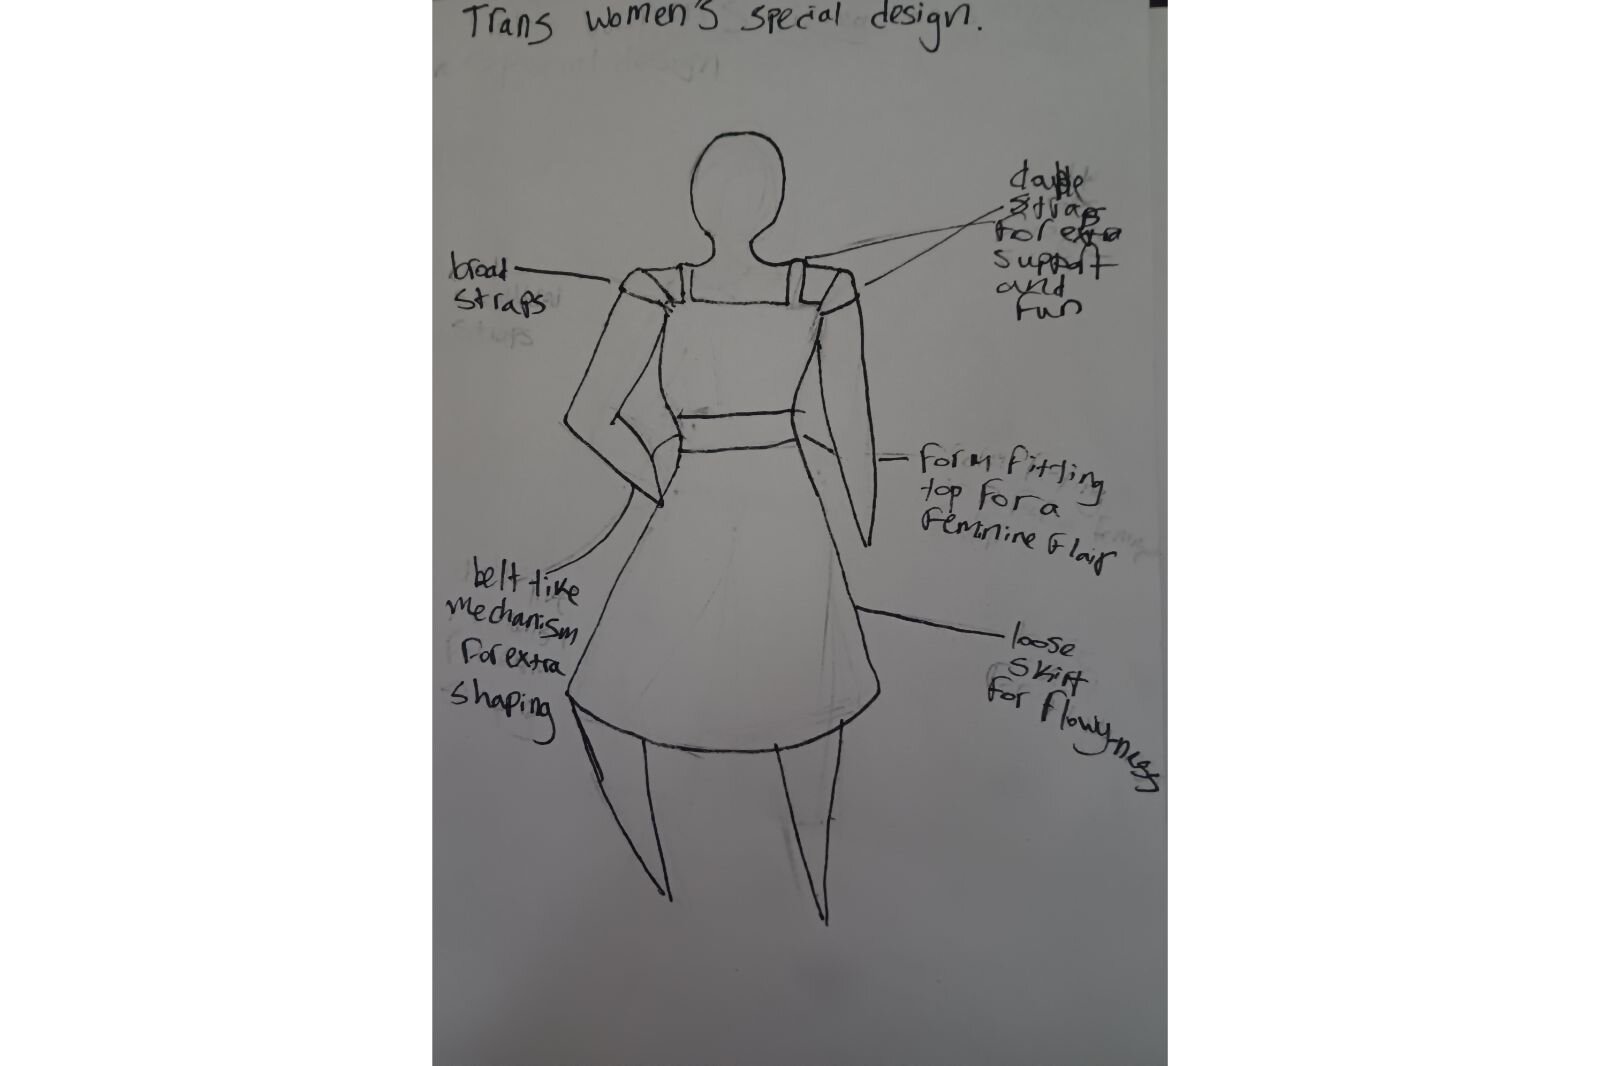 This trans woman dress was designed by Lila McCarthy to fit different body types.